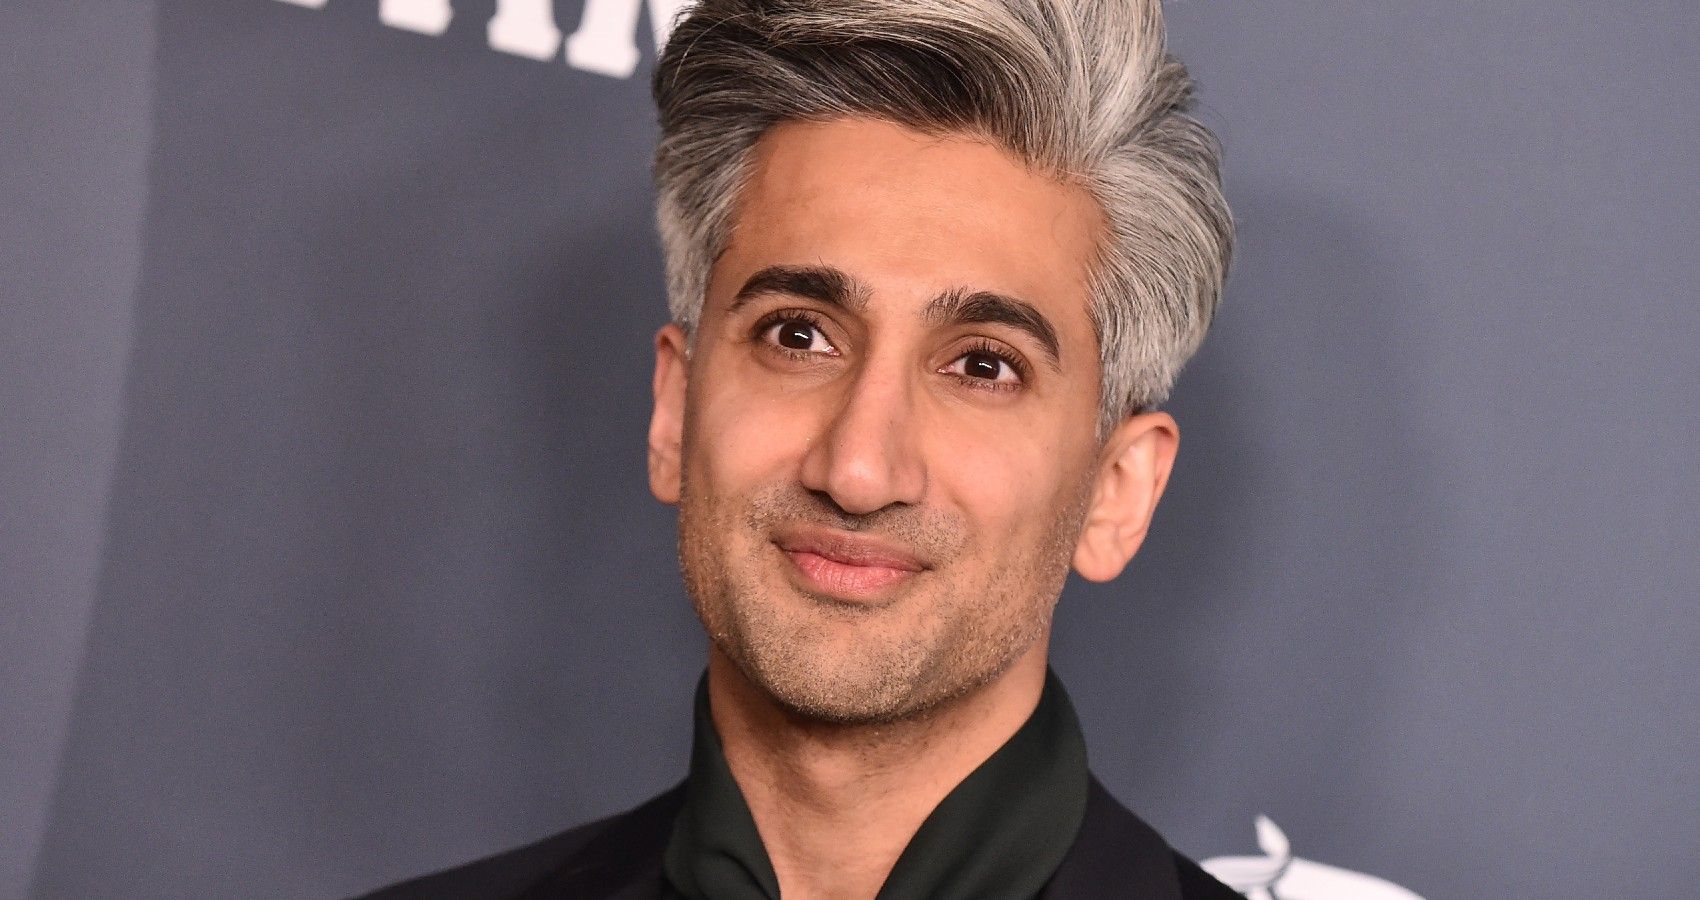 Tan France From ‘Queer Eye’ Is Expecting